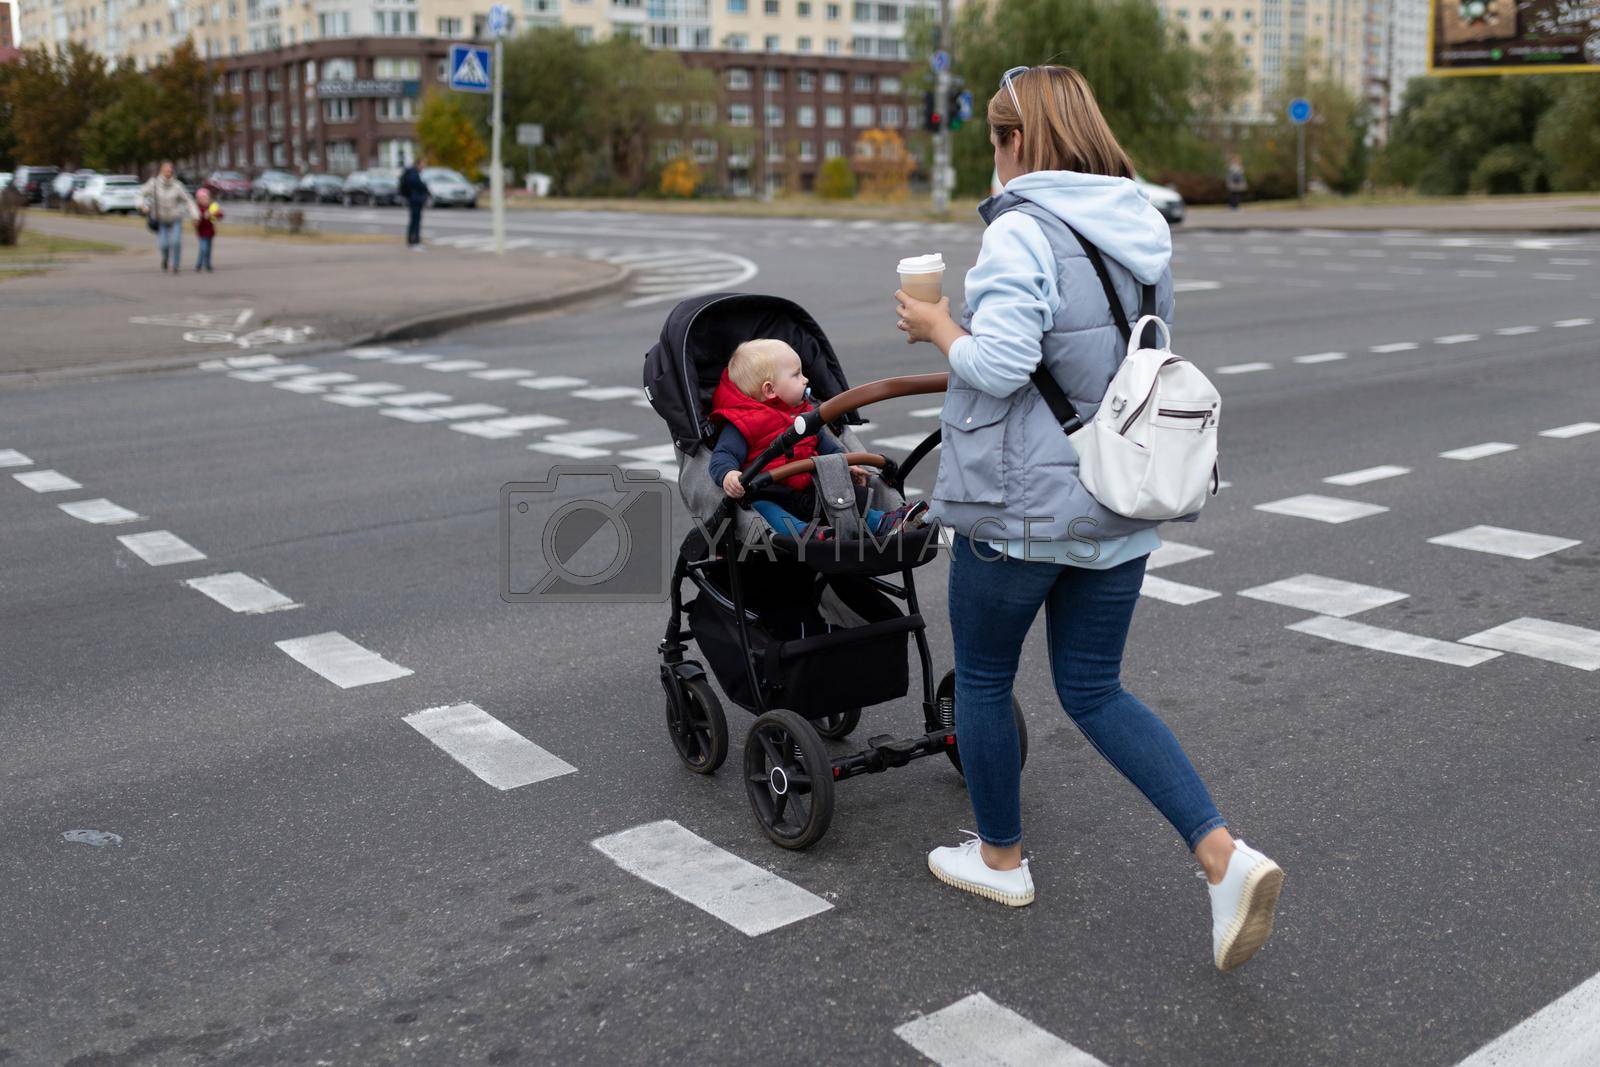 Royalty free image of a young mother with a stroller crosses the road at a pedestrian crossing with a cup of coffee in her hands by TRMK